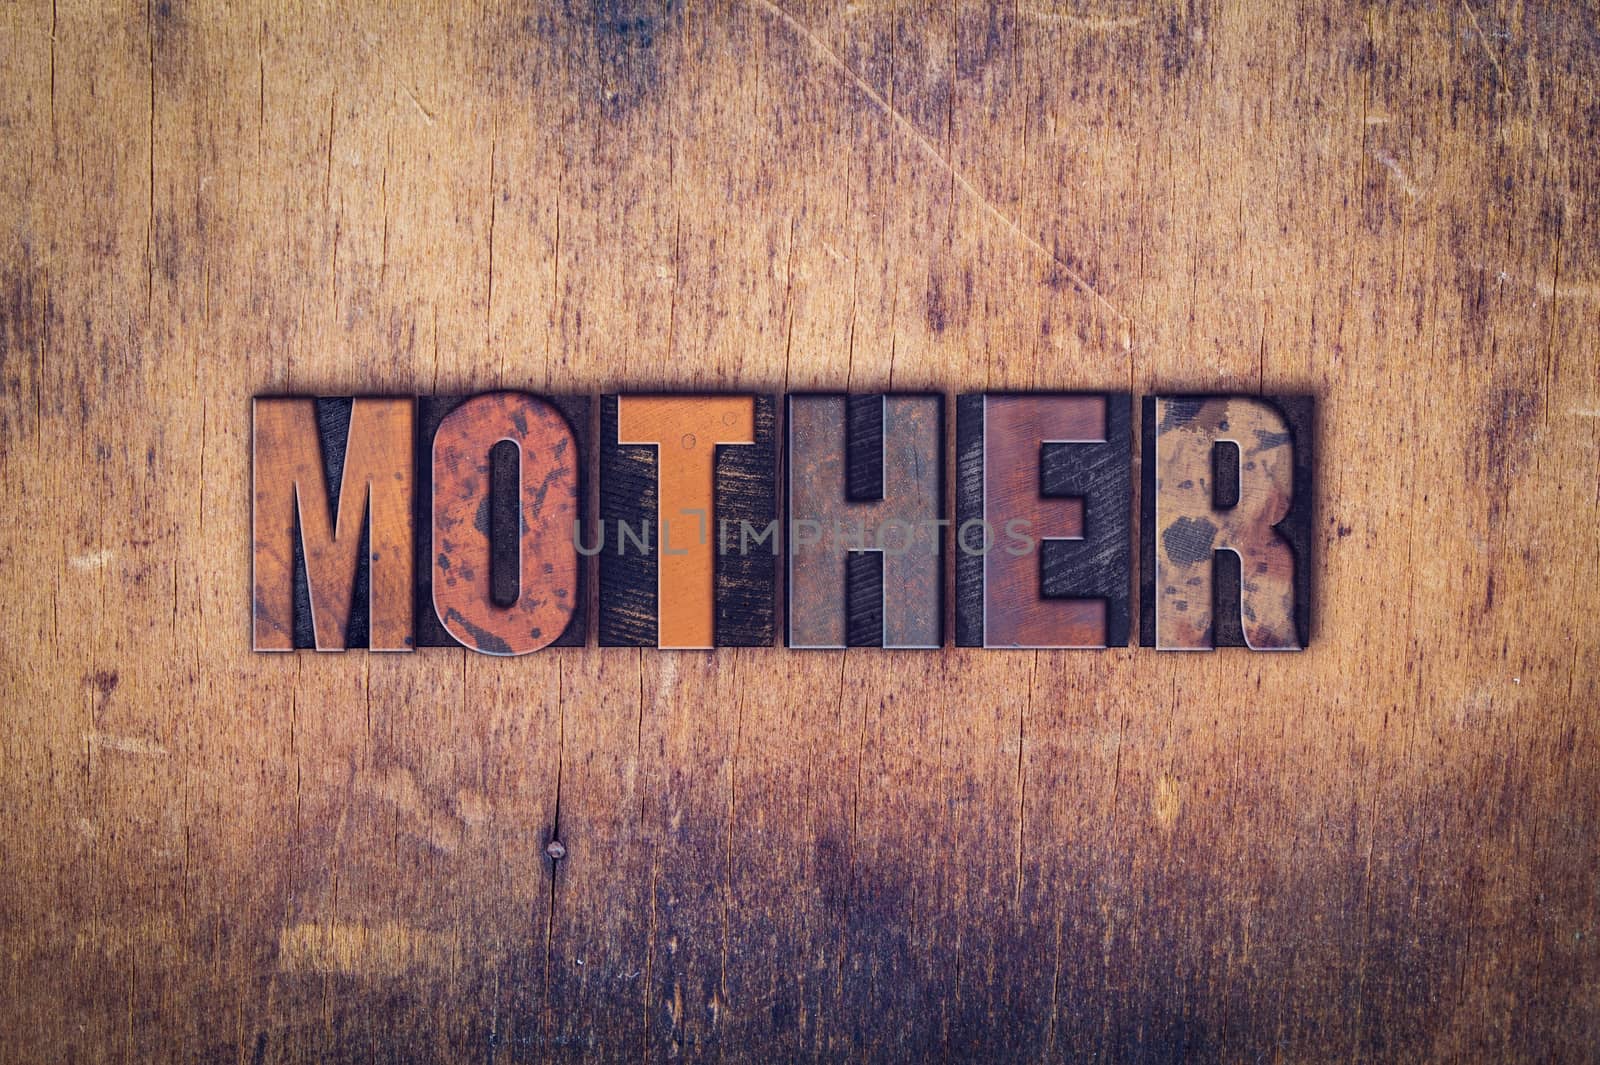 The word "Mother" written in dirty vintage letterpress type on a aged wooden background.